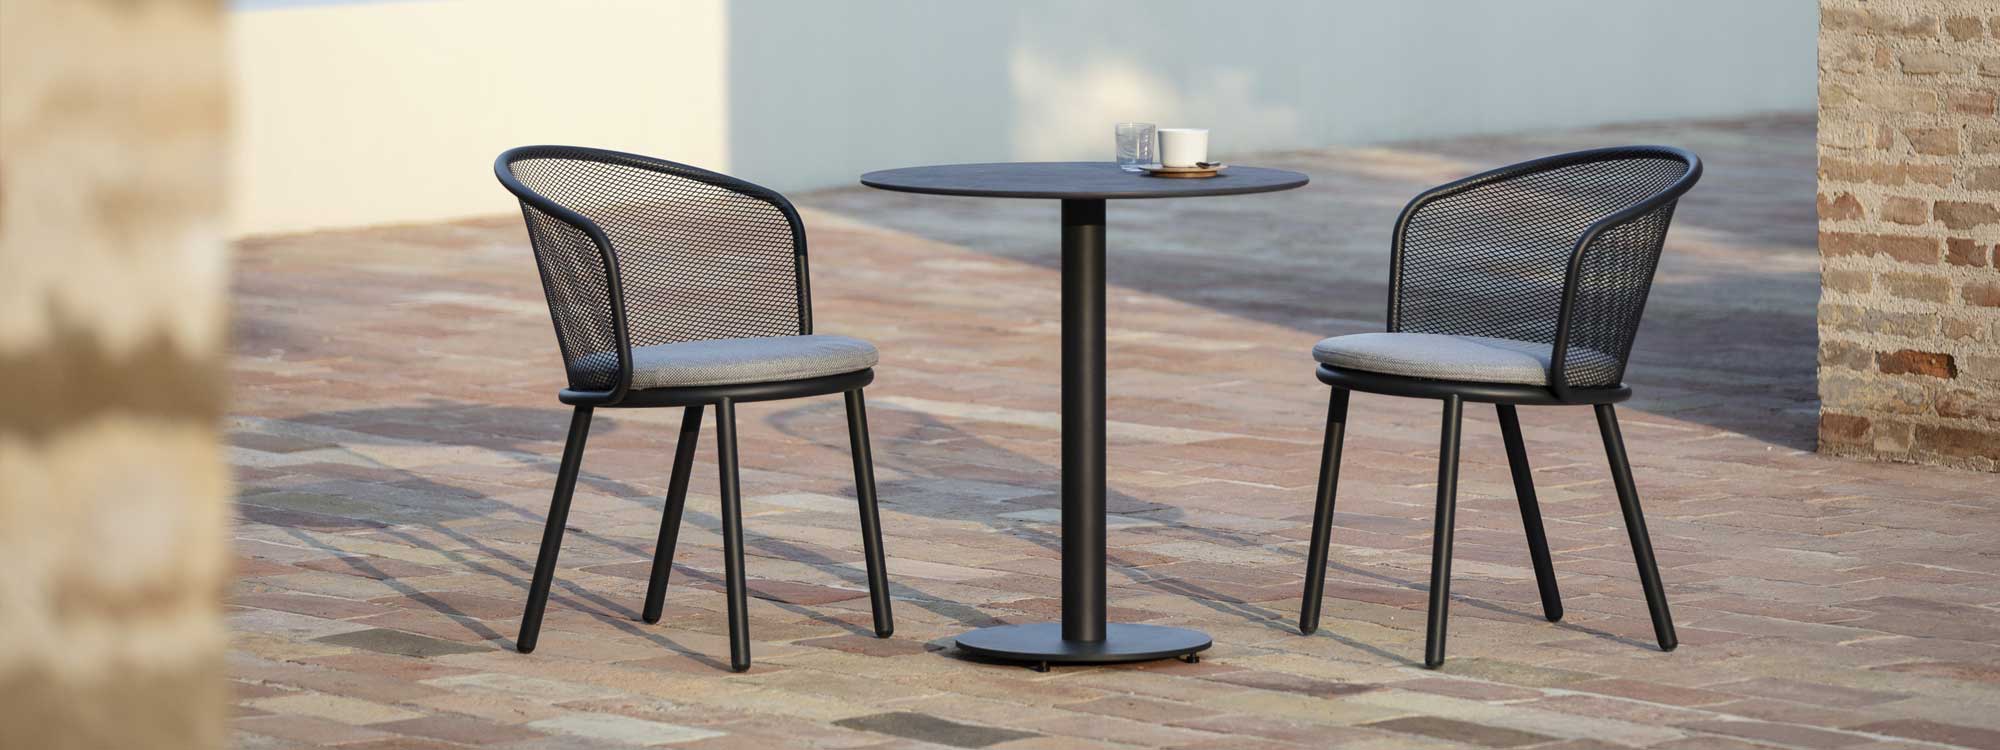 Anthracite Baza outdoor chair and Branta bistro table in courtyard